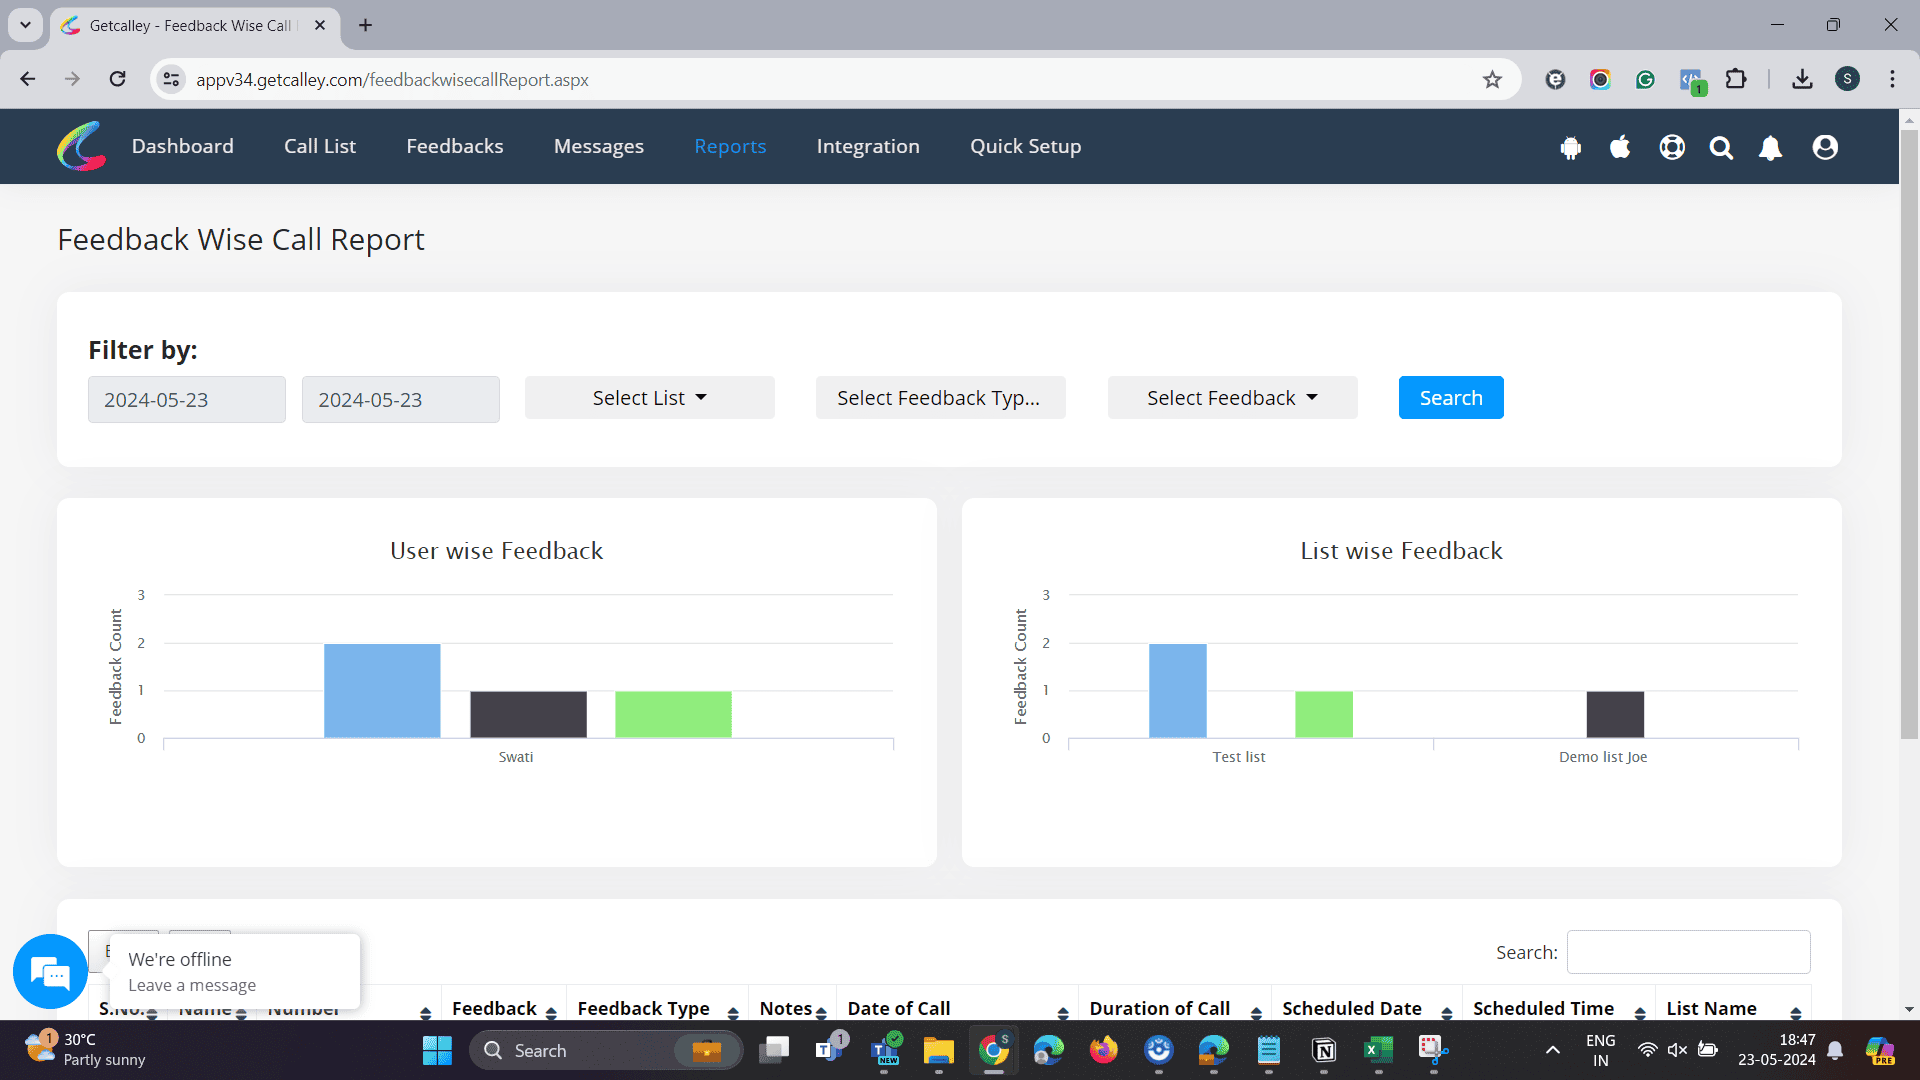 Feedback Wise Call Report header